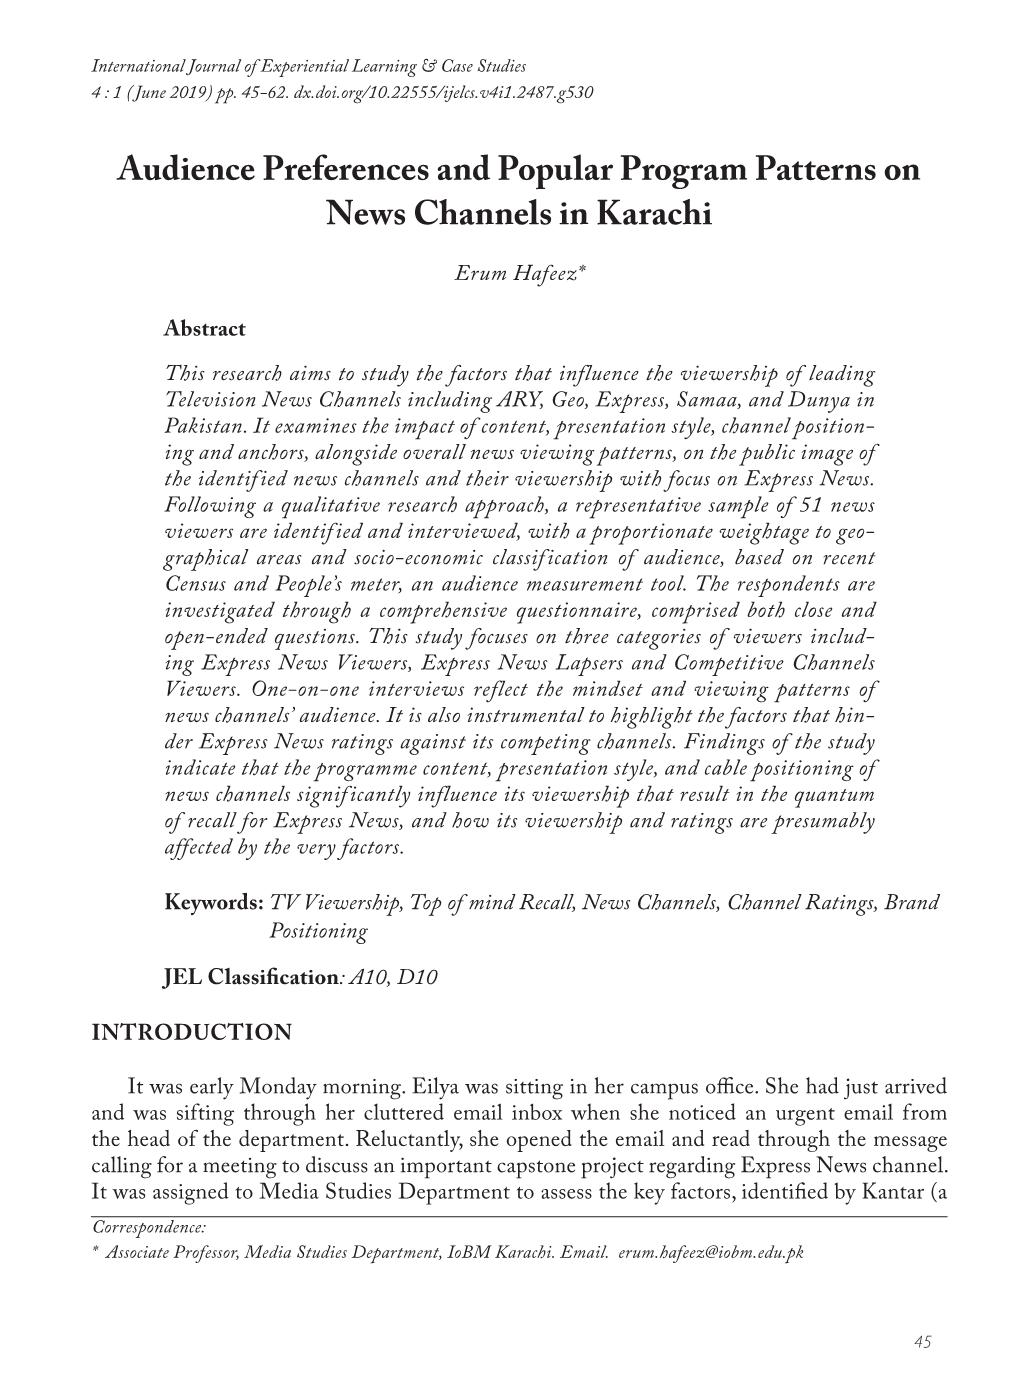 Audience Preferences and Popular Program Patterns on News Channels in Karachi